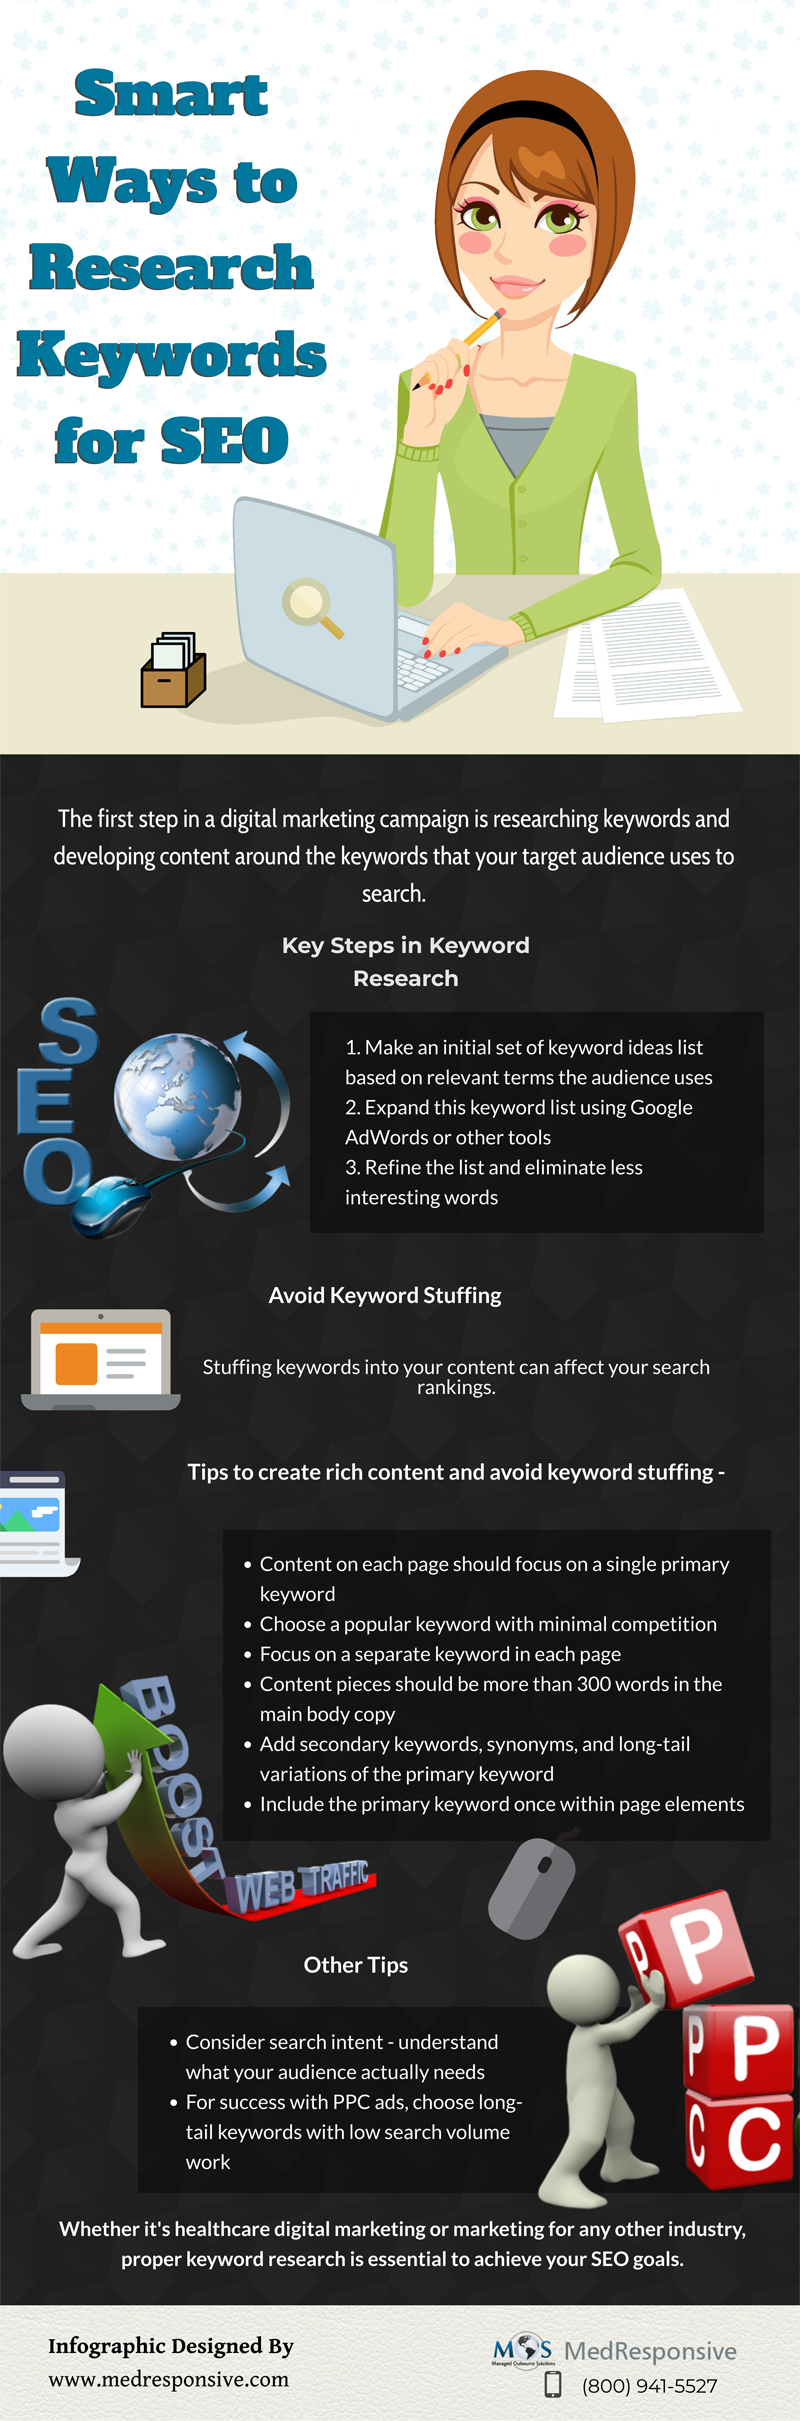 Research Keywords for SEO